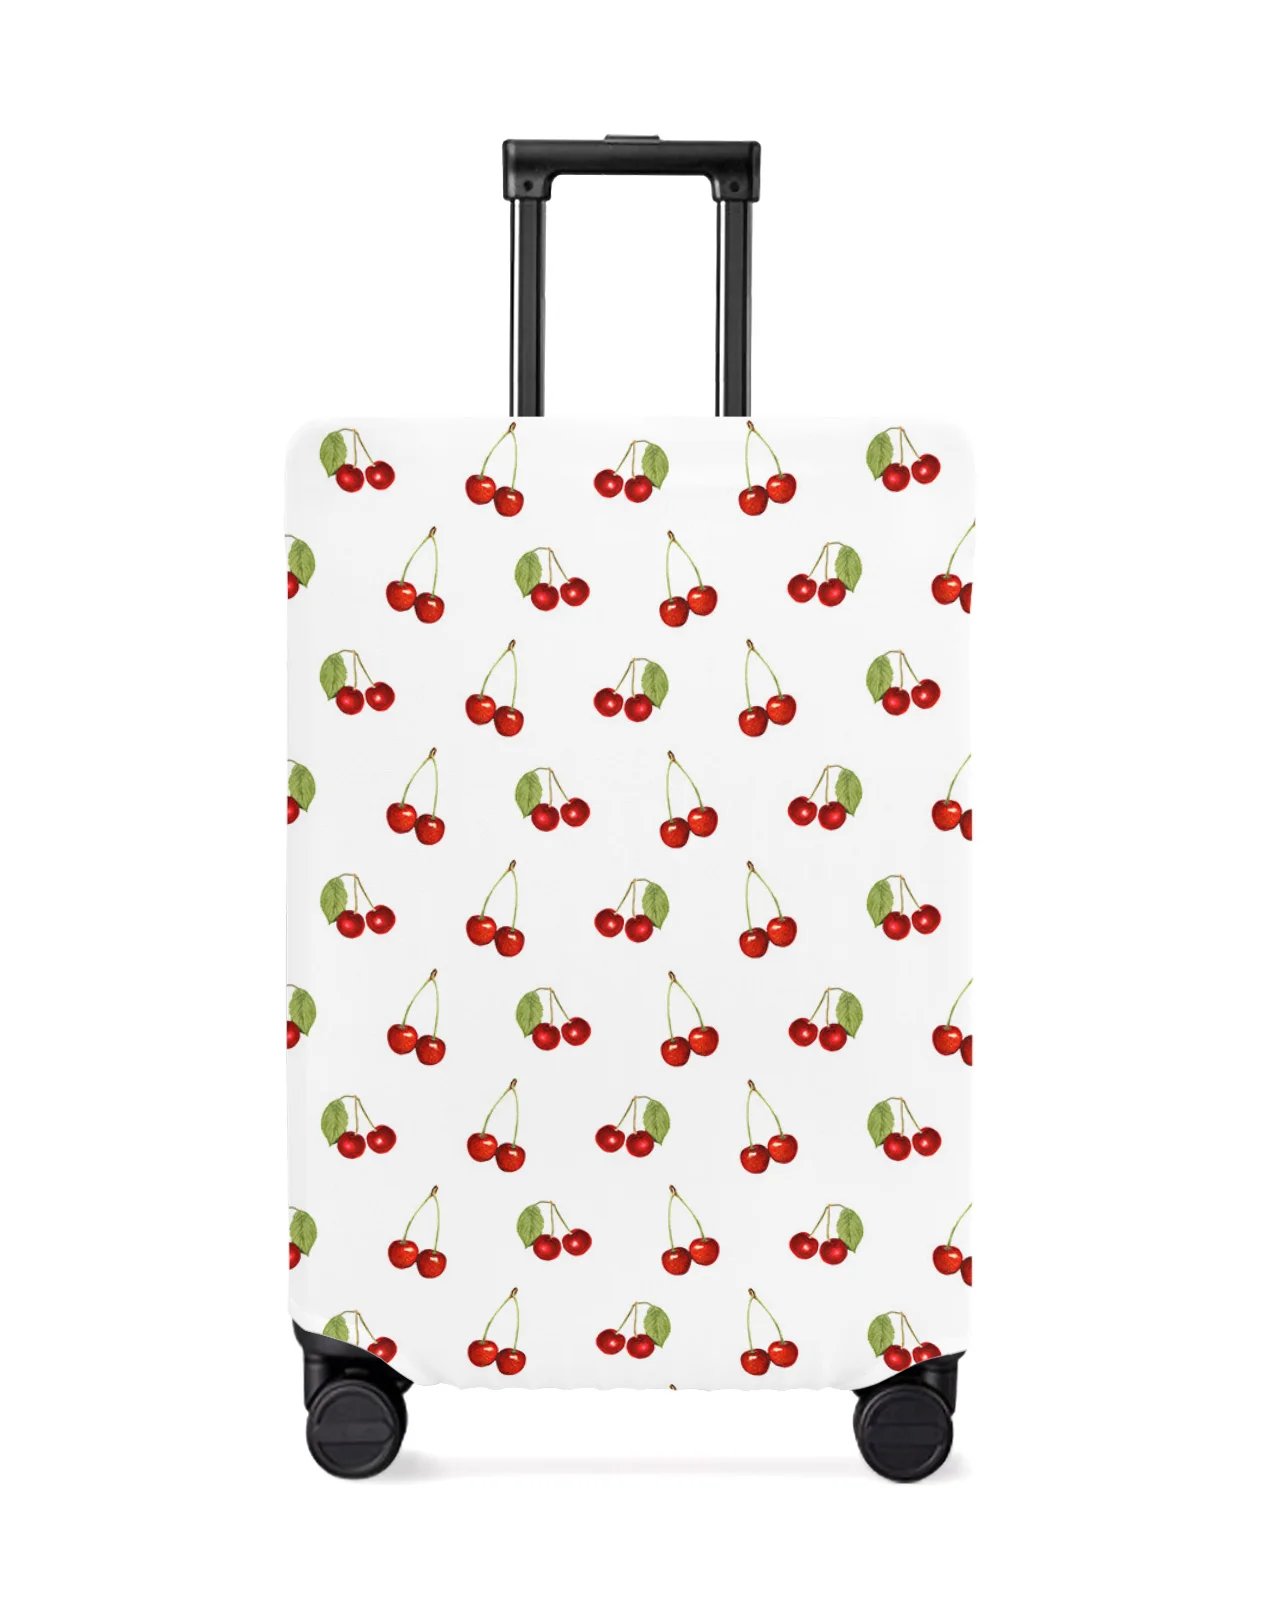 cherry-fruit-retro-luggage-cover-stretch-suitcase-protector-baggage-dust-case-cover-for-18-32-inch-travel-suitcase-case